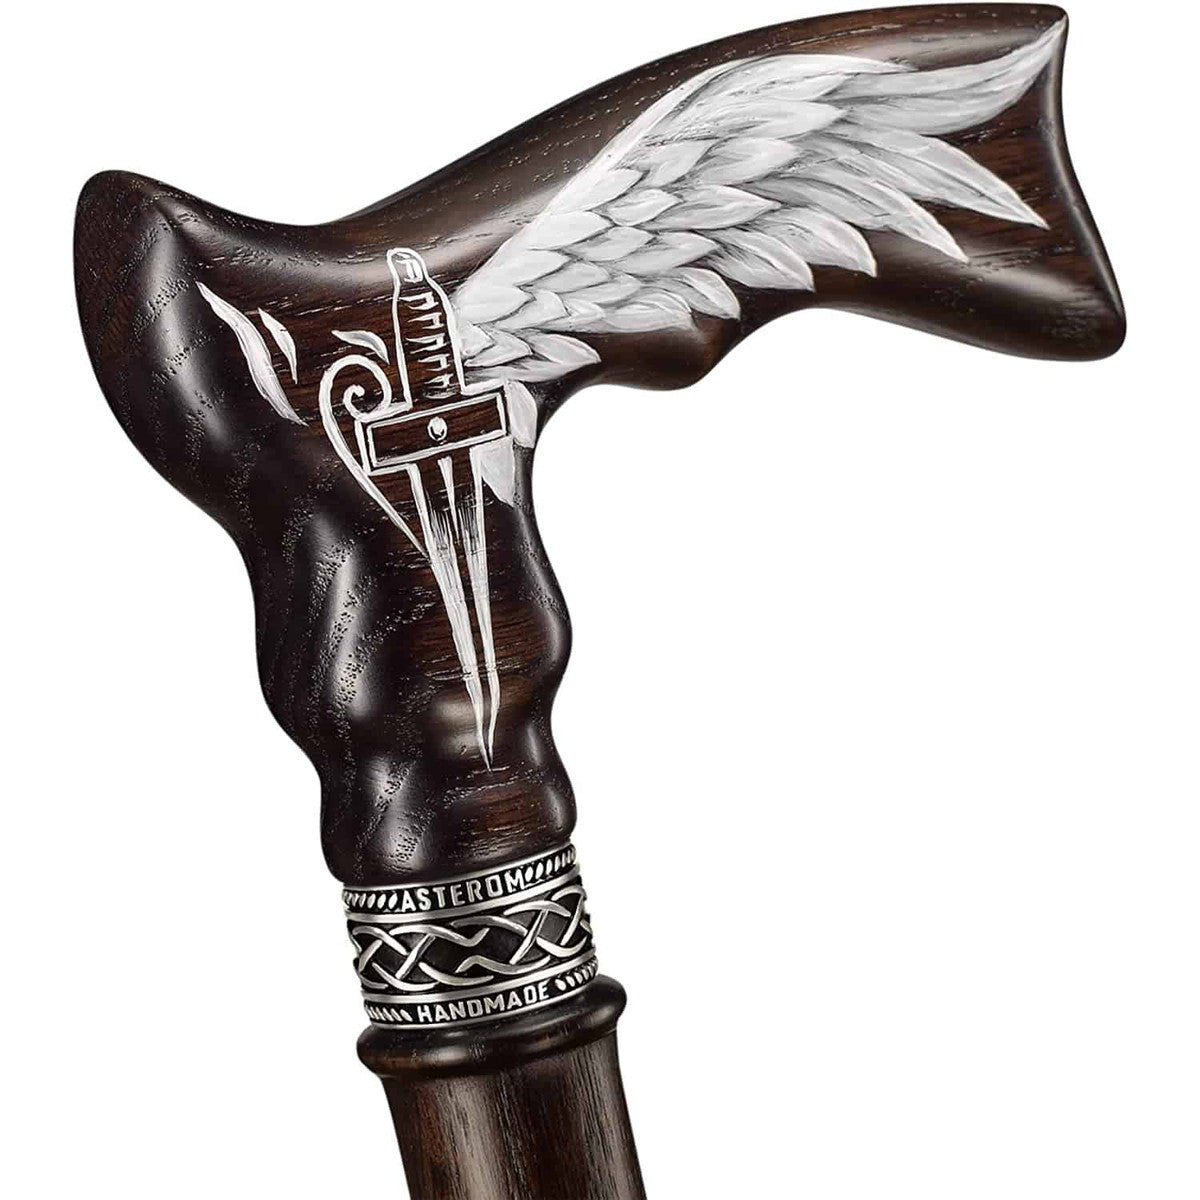 Custom Carved Hand Painted Guardian Angel Winged God Cane